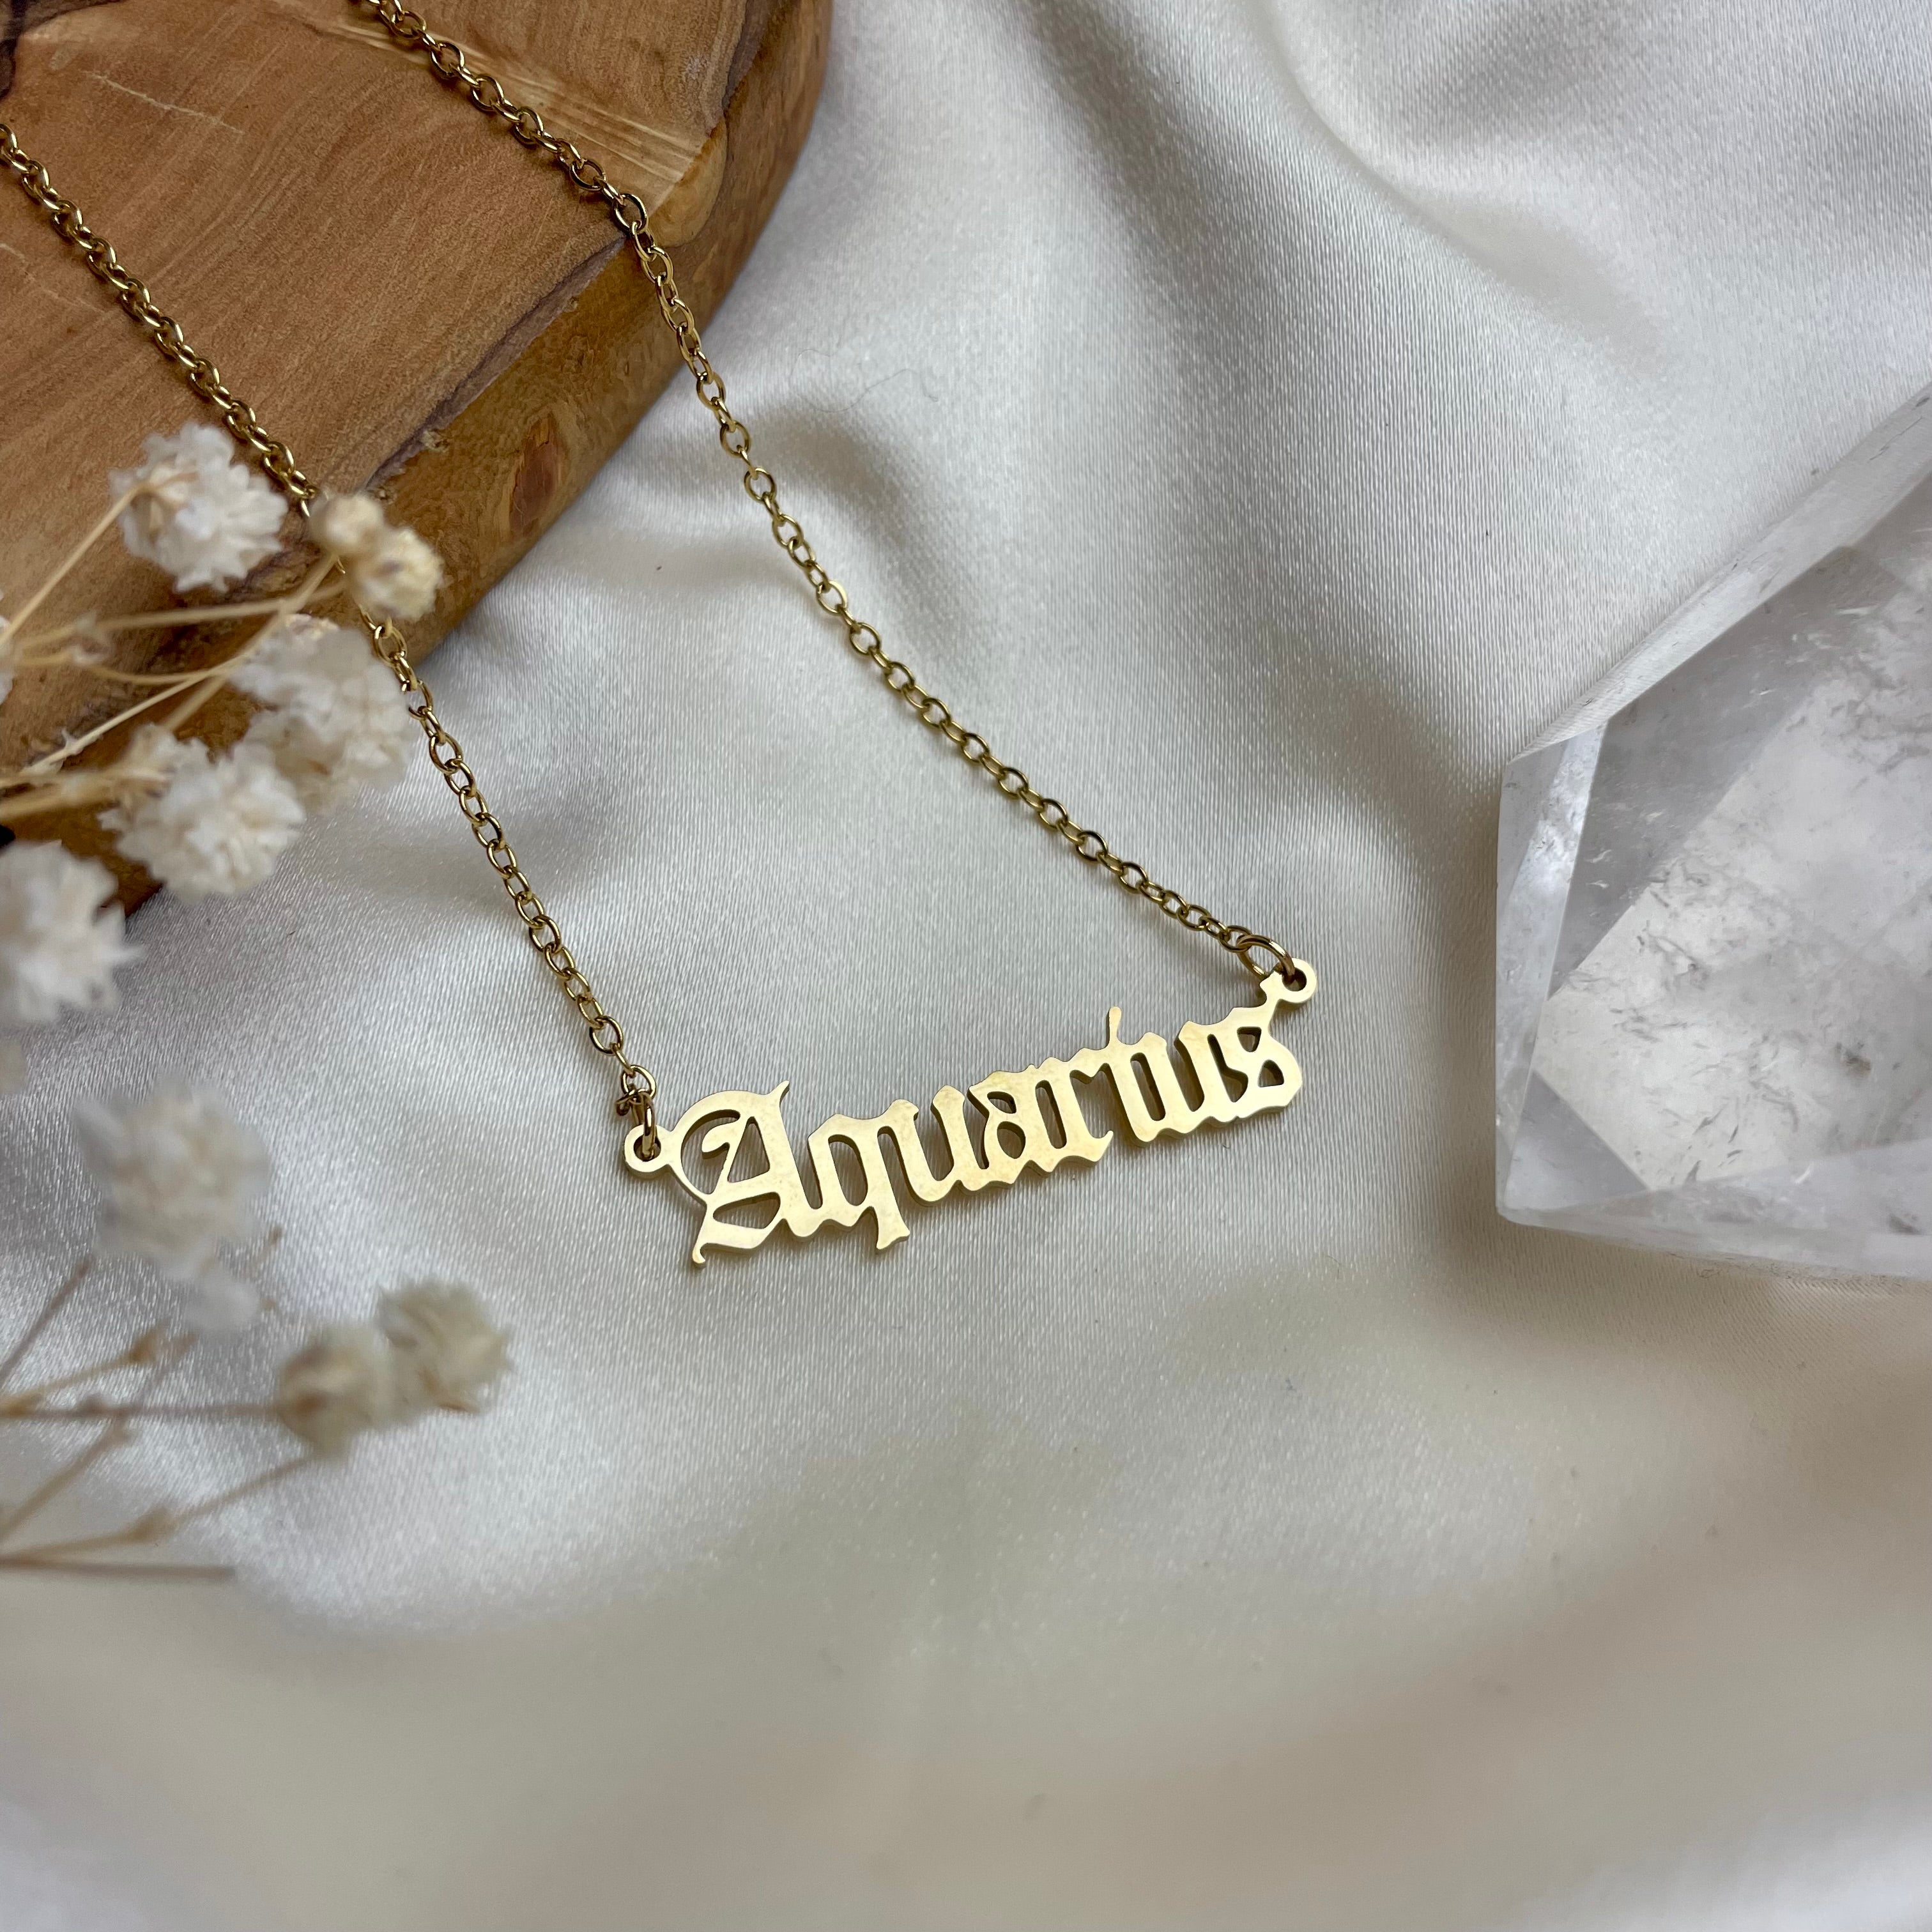 Zodiac Necklace - Choose Your Sign!